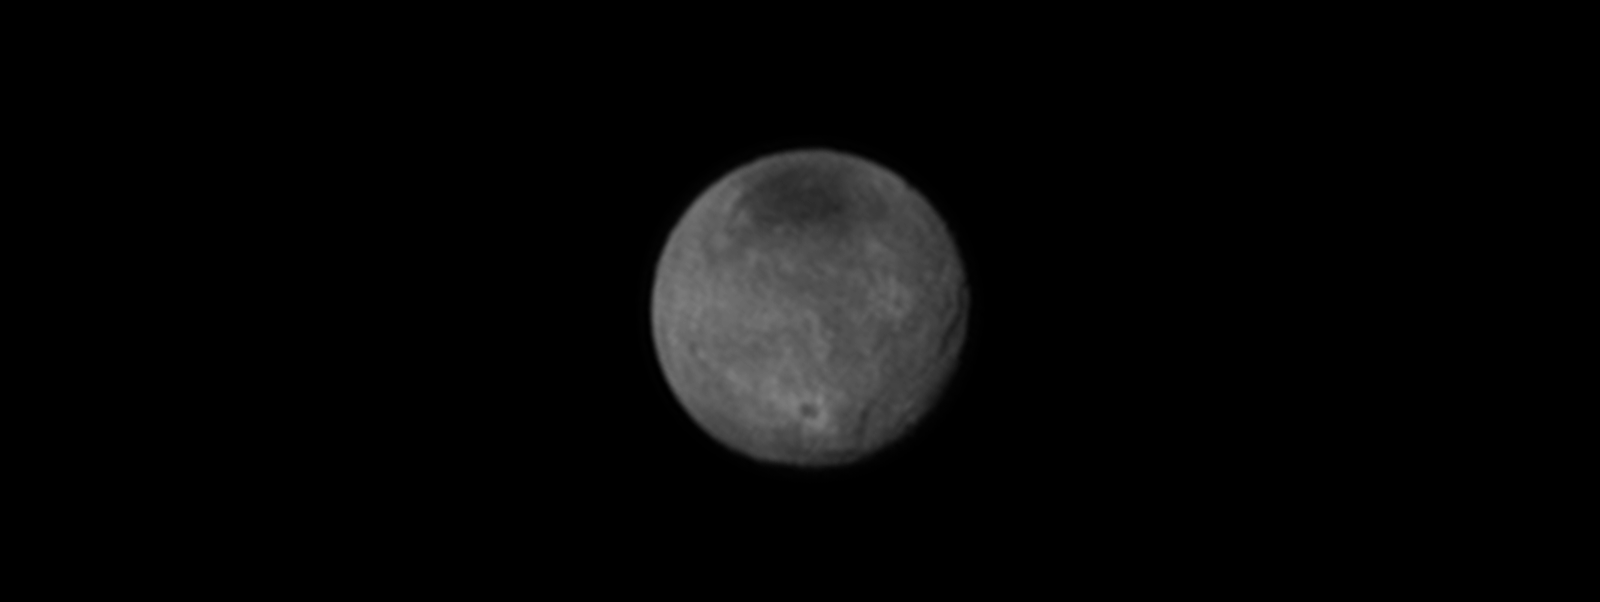 071215_charon_alone.png